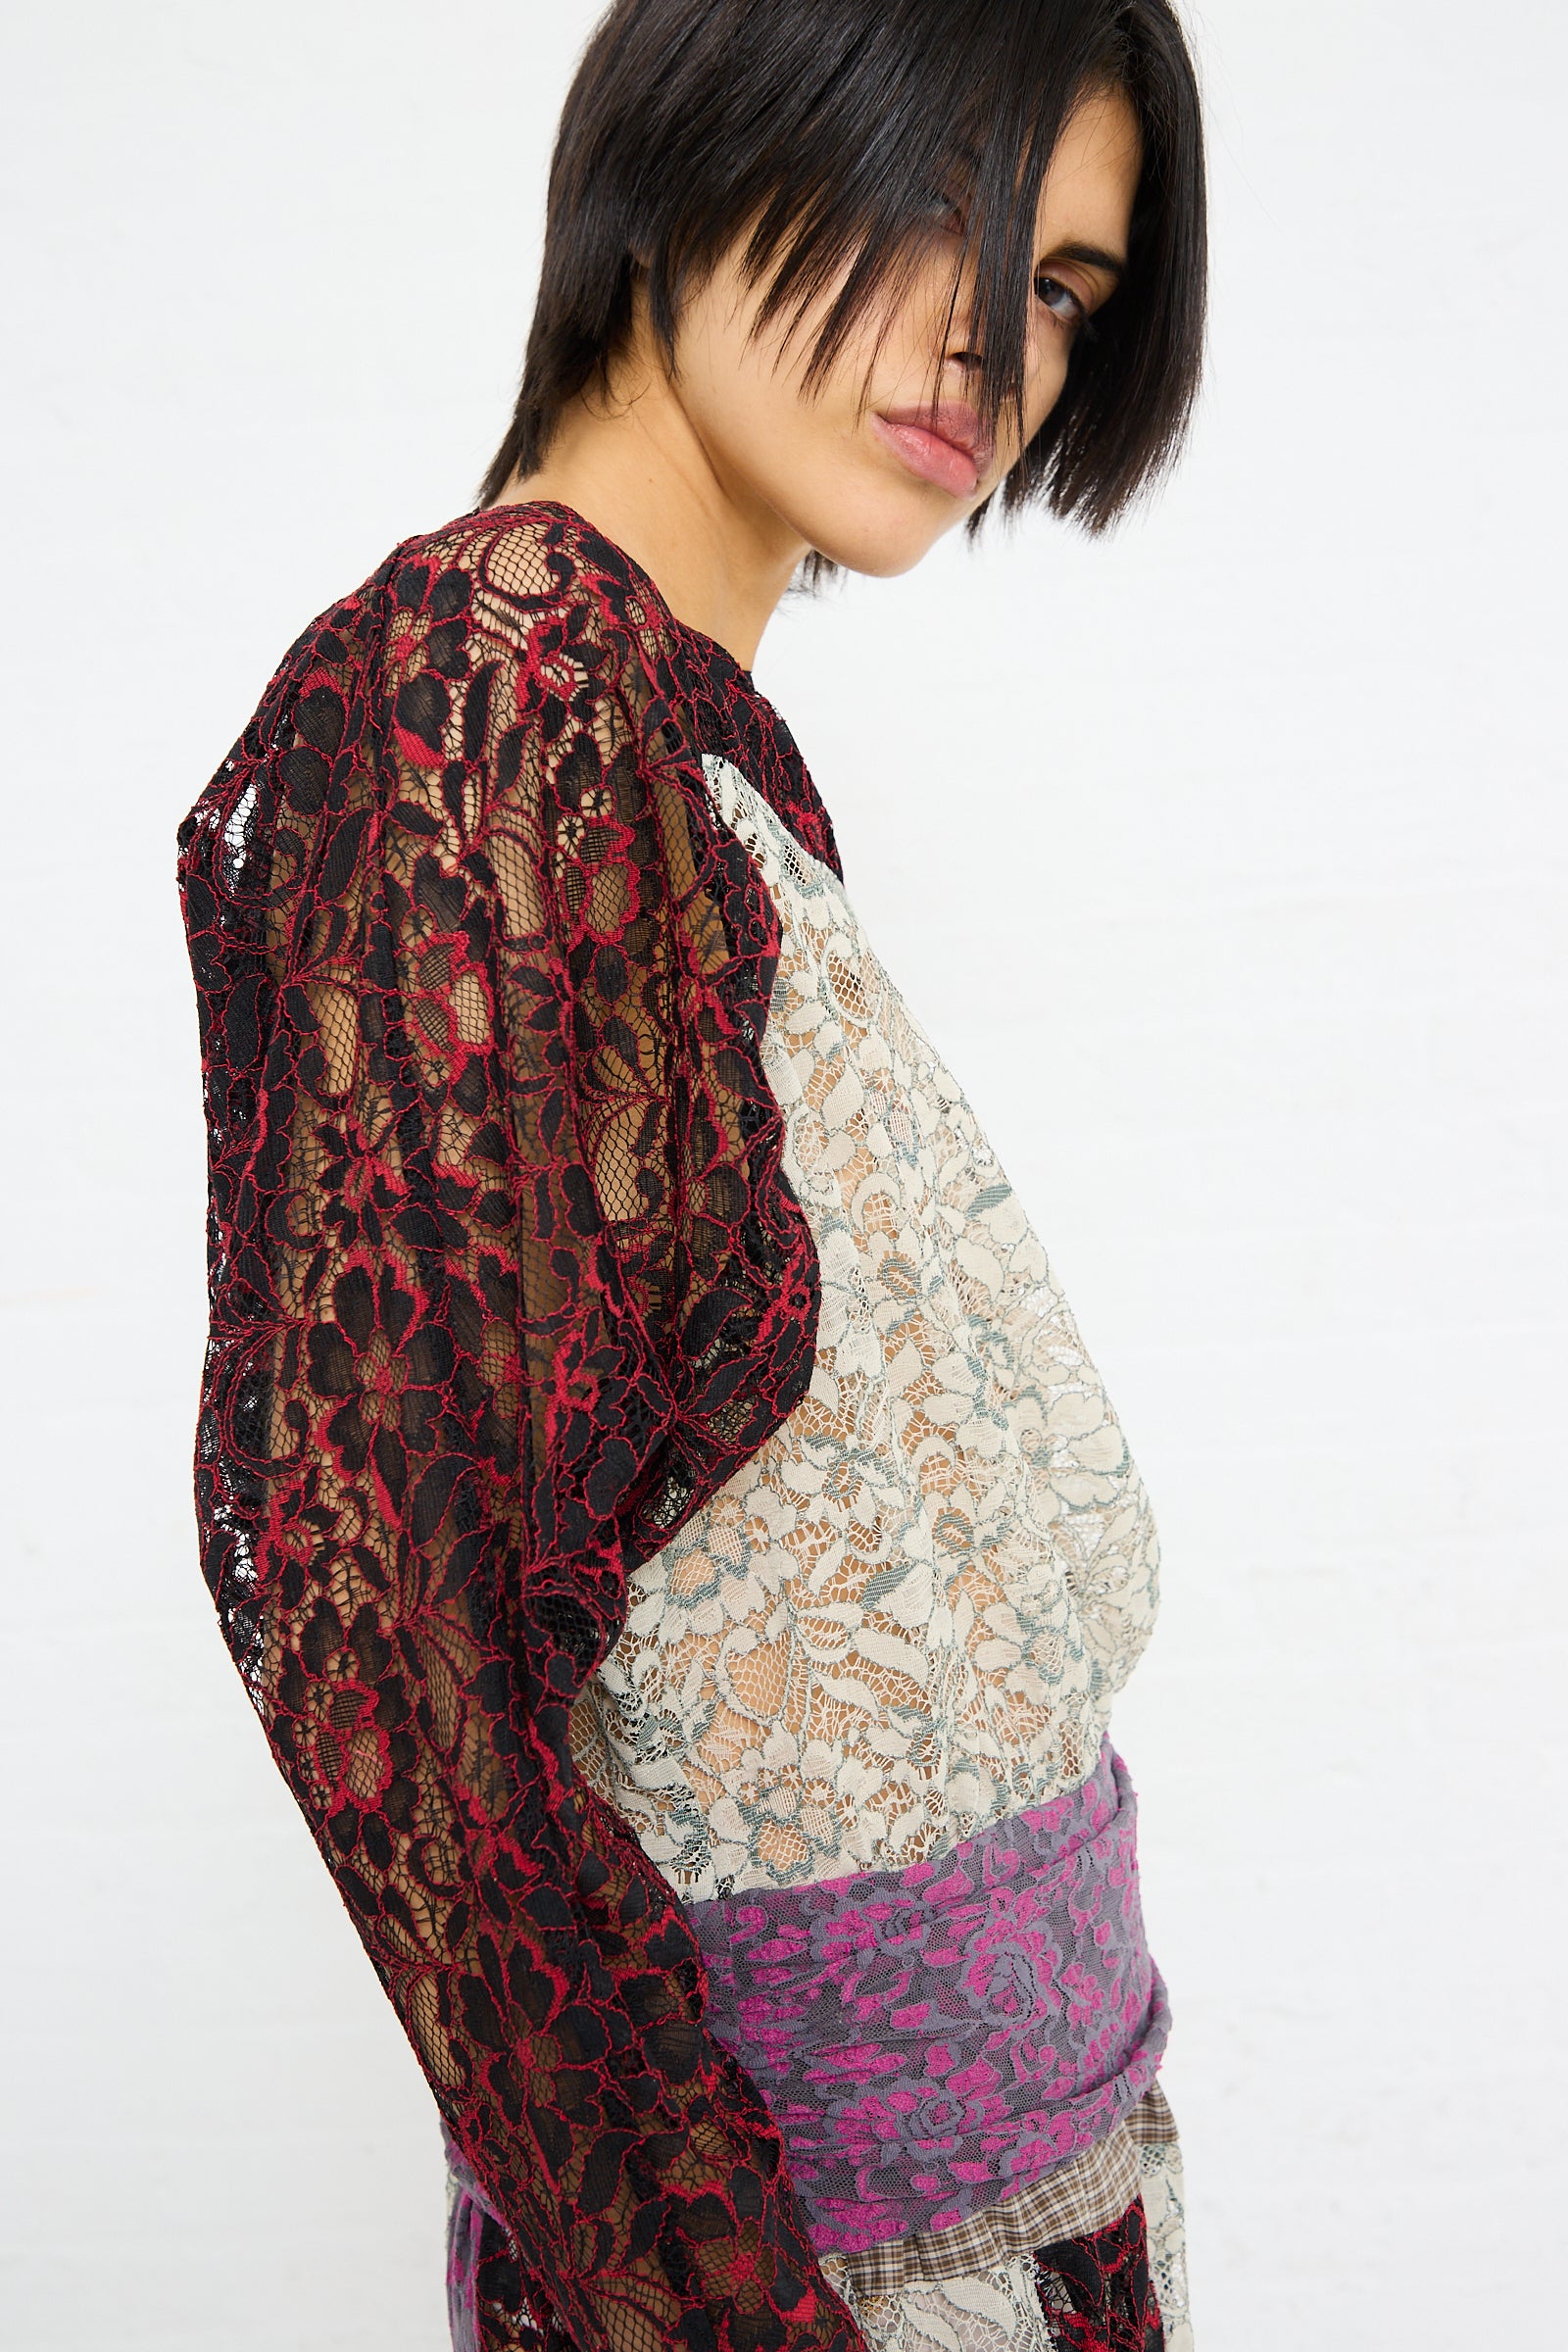 Woman in SC103 Lace Ritual Top in Thrash with patterned skirt looking over her shoulder.